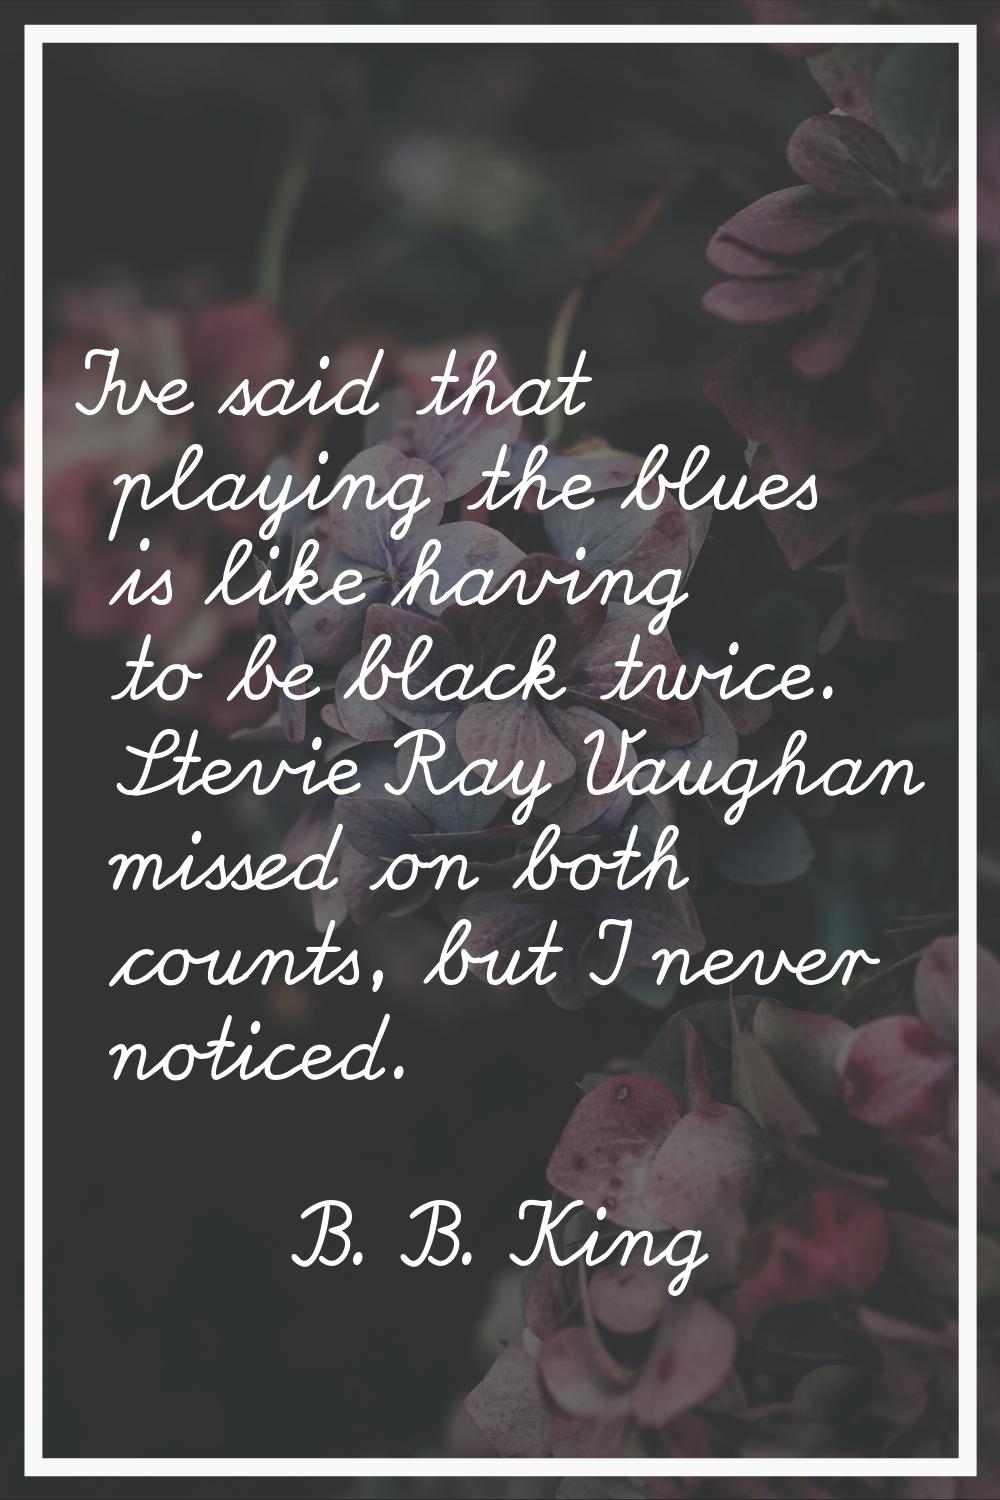 I've said that playing the blues is like having to be black twice. Stevie Ray Vaughan missed on bot